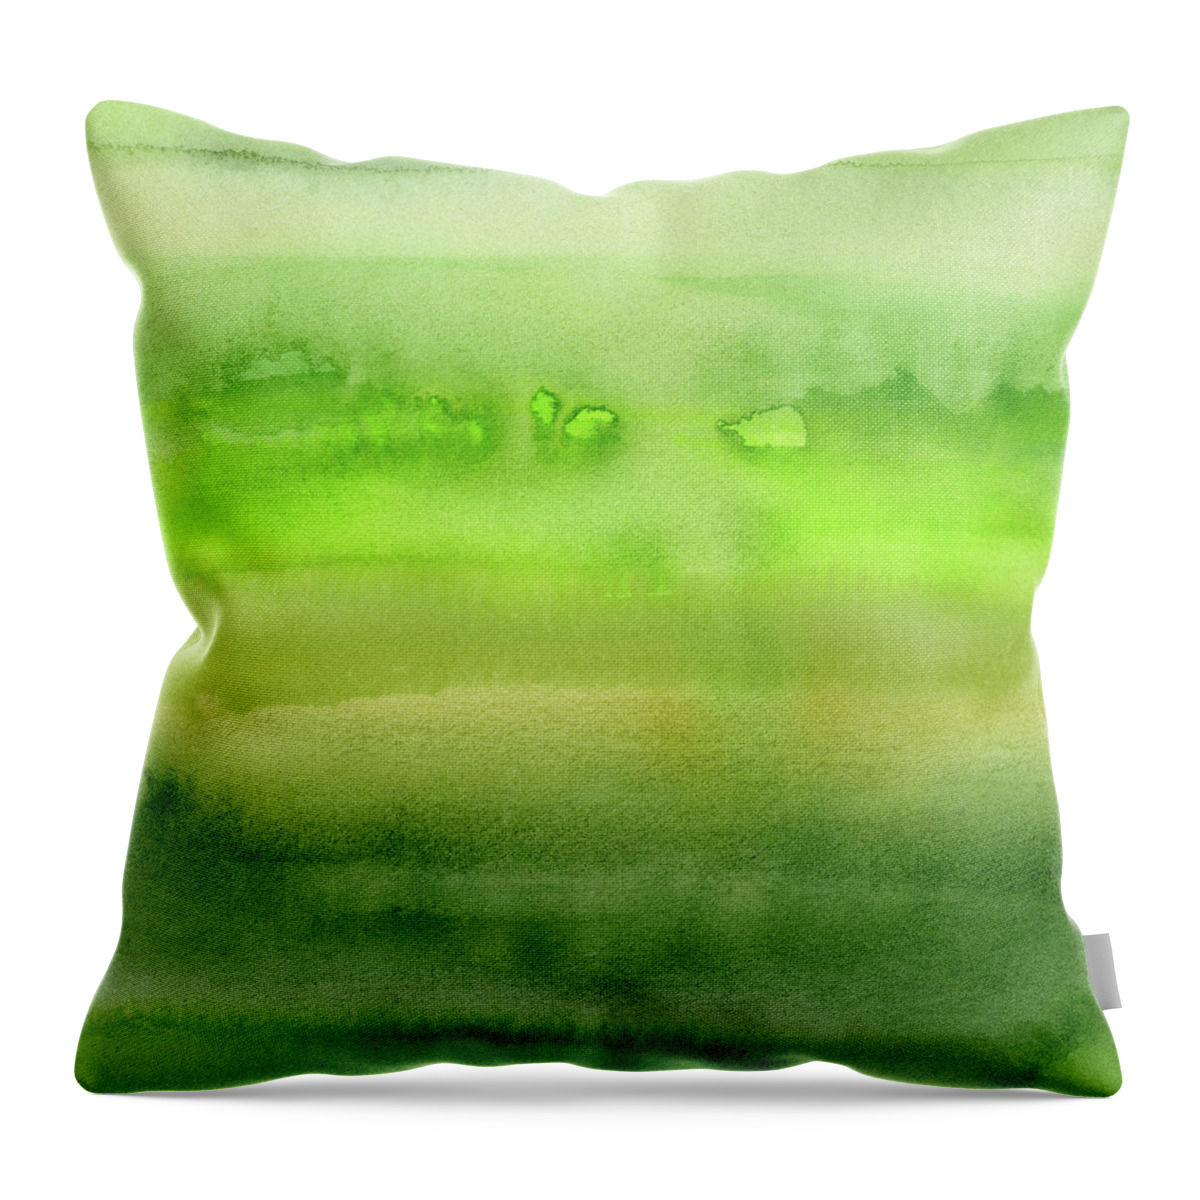 Green Throw Pillow featuring the painting Grass Green Abstract Watercolor by Olga Shvartsur